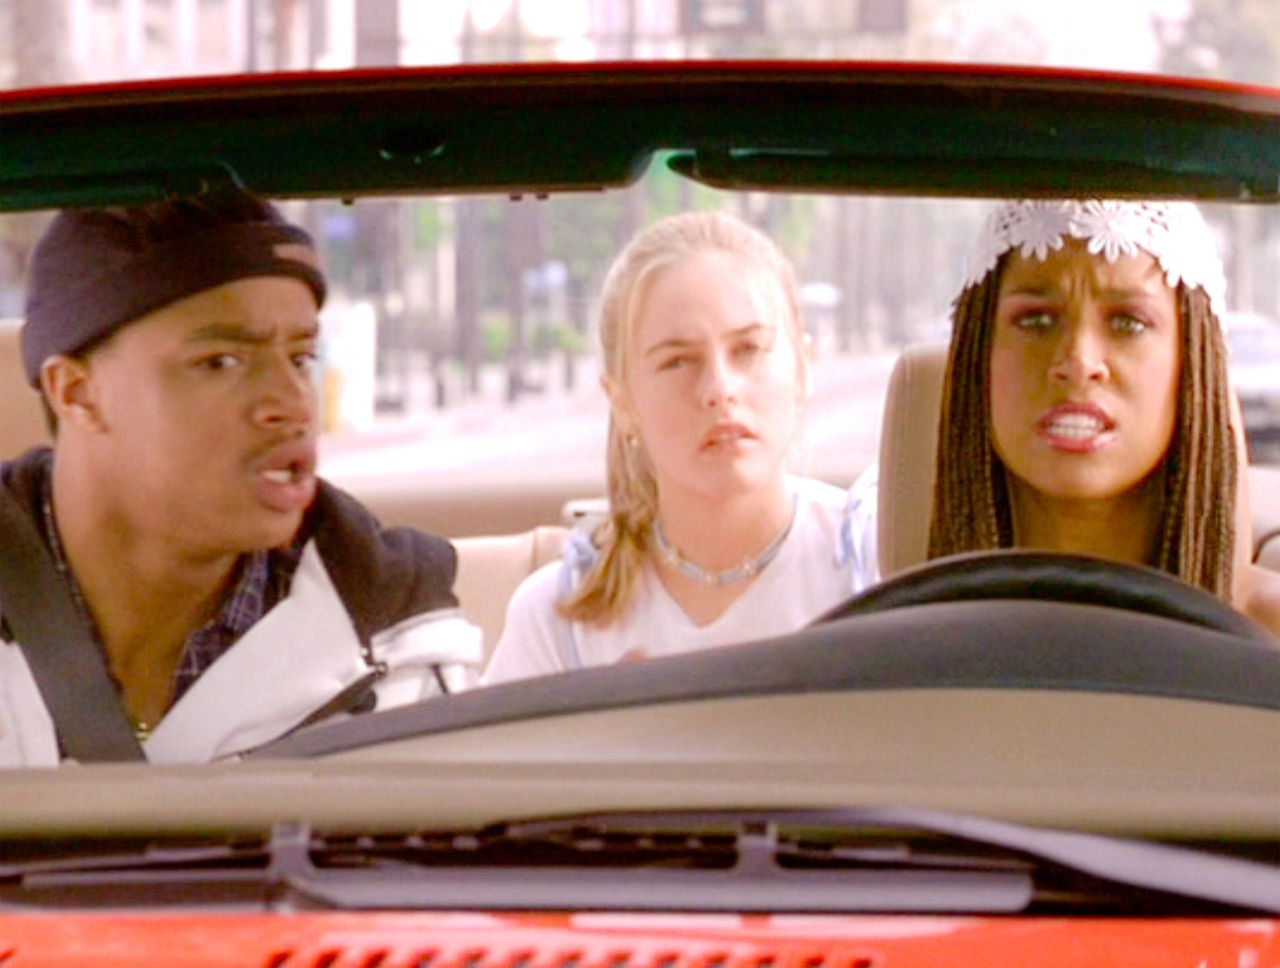 Donald Faison, seen here with Silverstone and Dash, went on to success on TV series such as "Felicity," "Scrubs" and "The Exes."